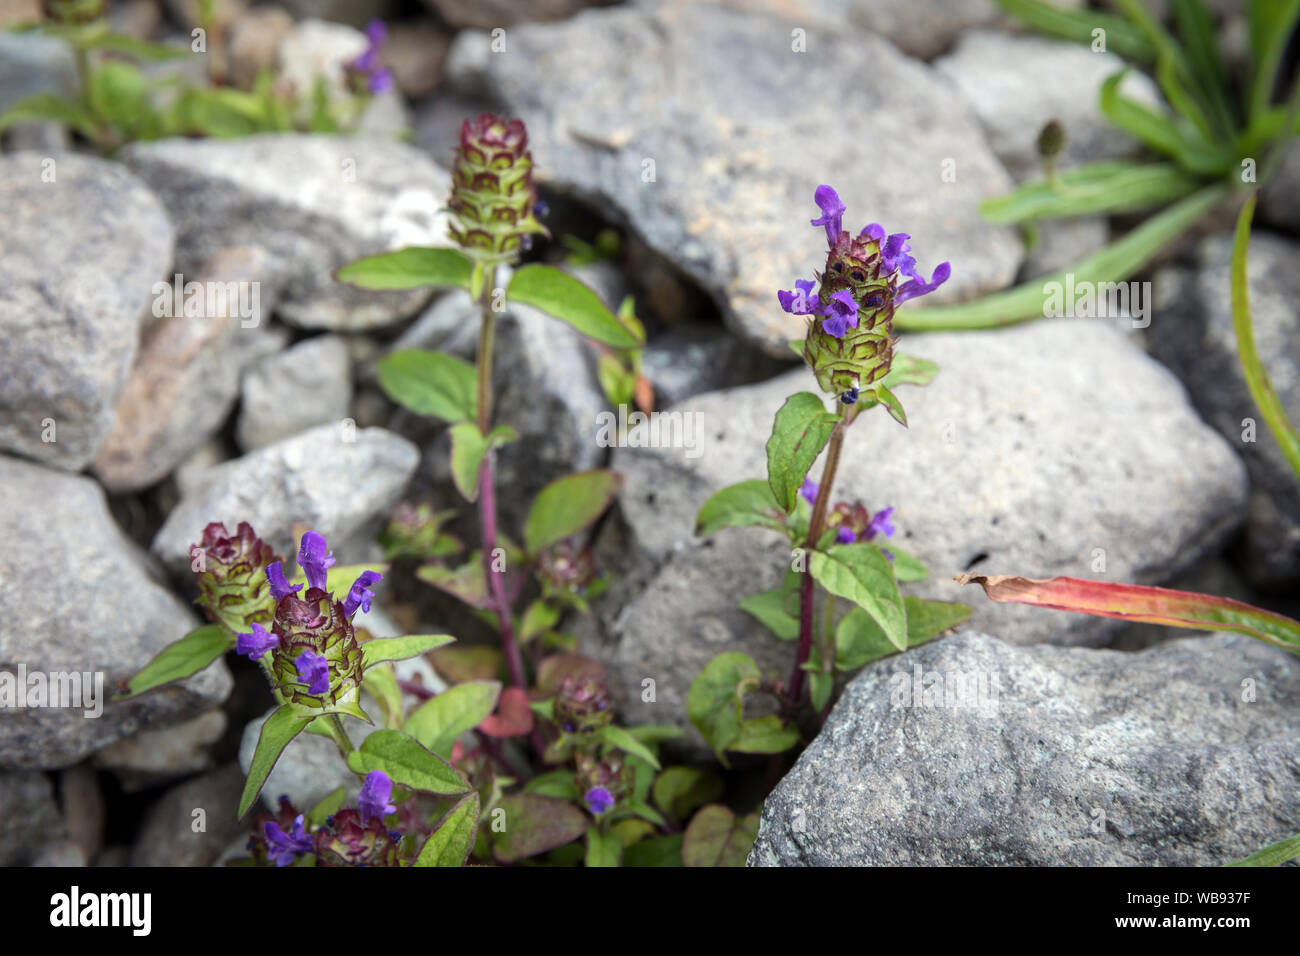 Self Heal, also known as Prunella vulgaris, common self-heal, heal-all, woundwort, heart-of-the-earth, carpenter's herb, brownwort and blue curls. The Stock Photo